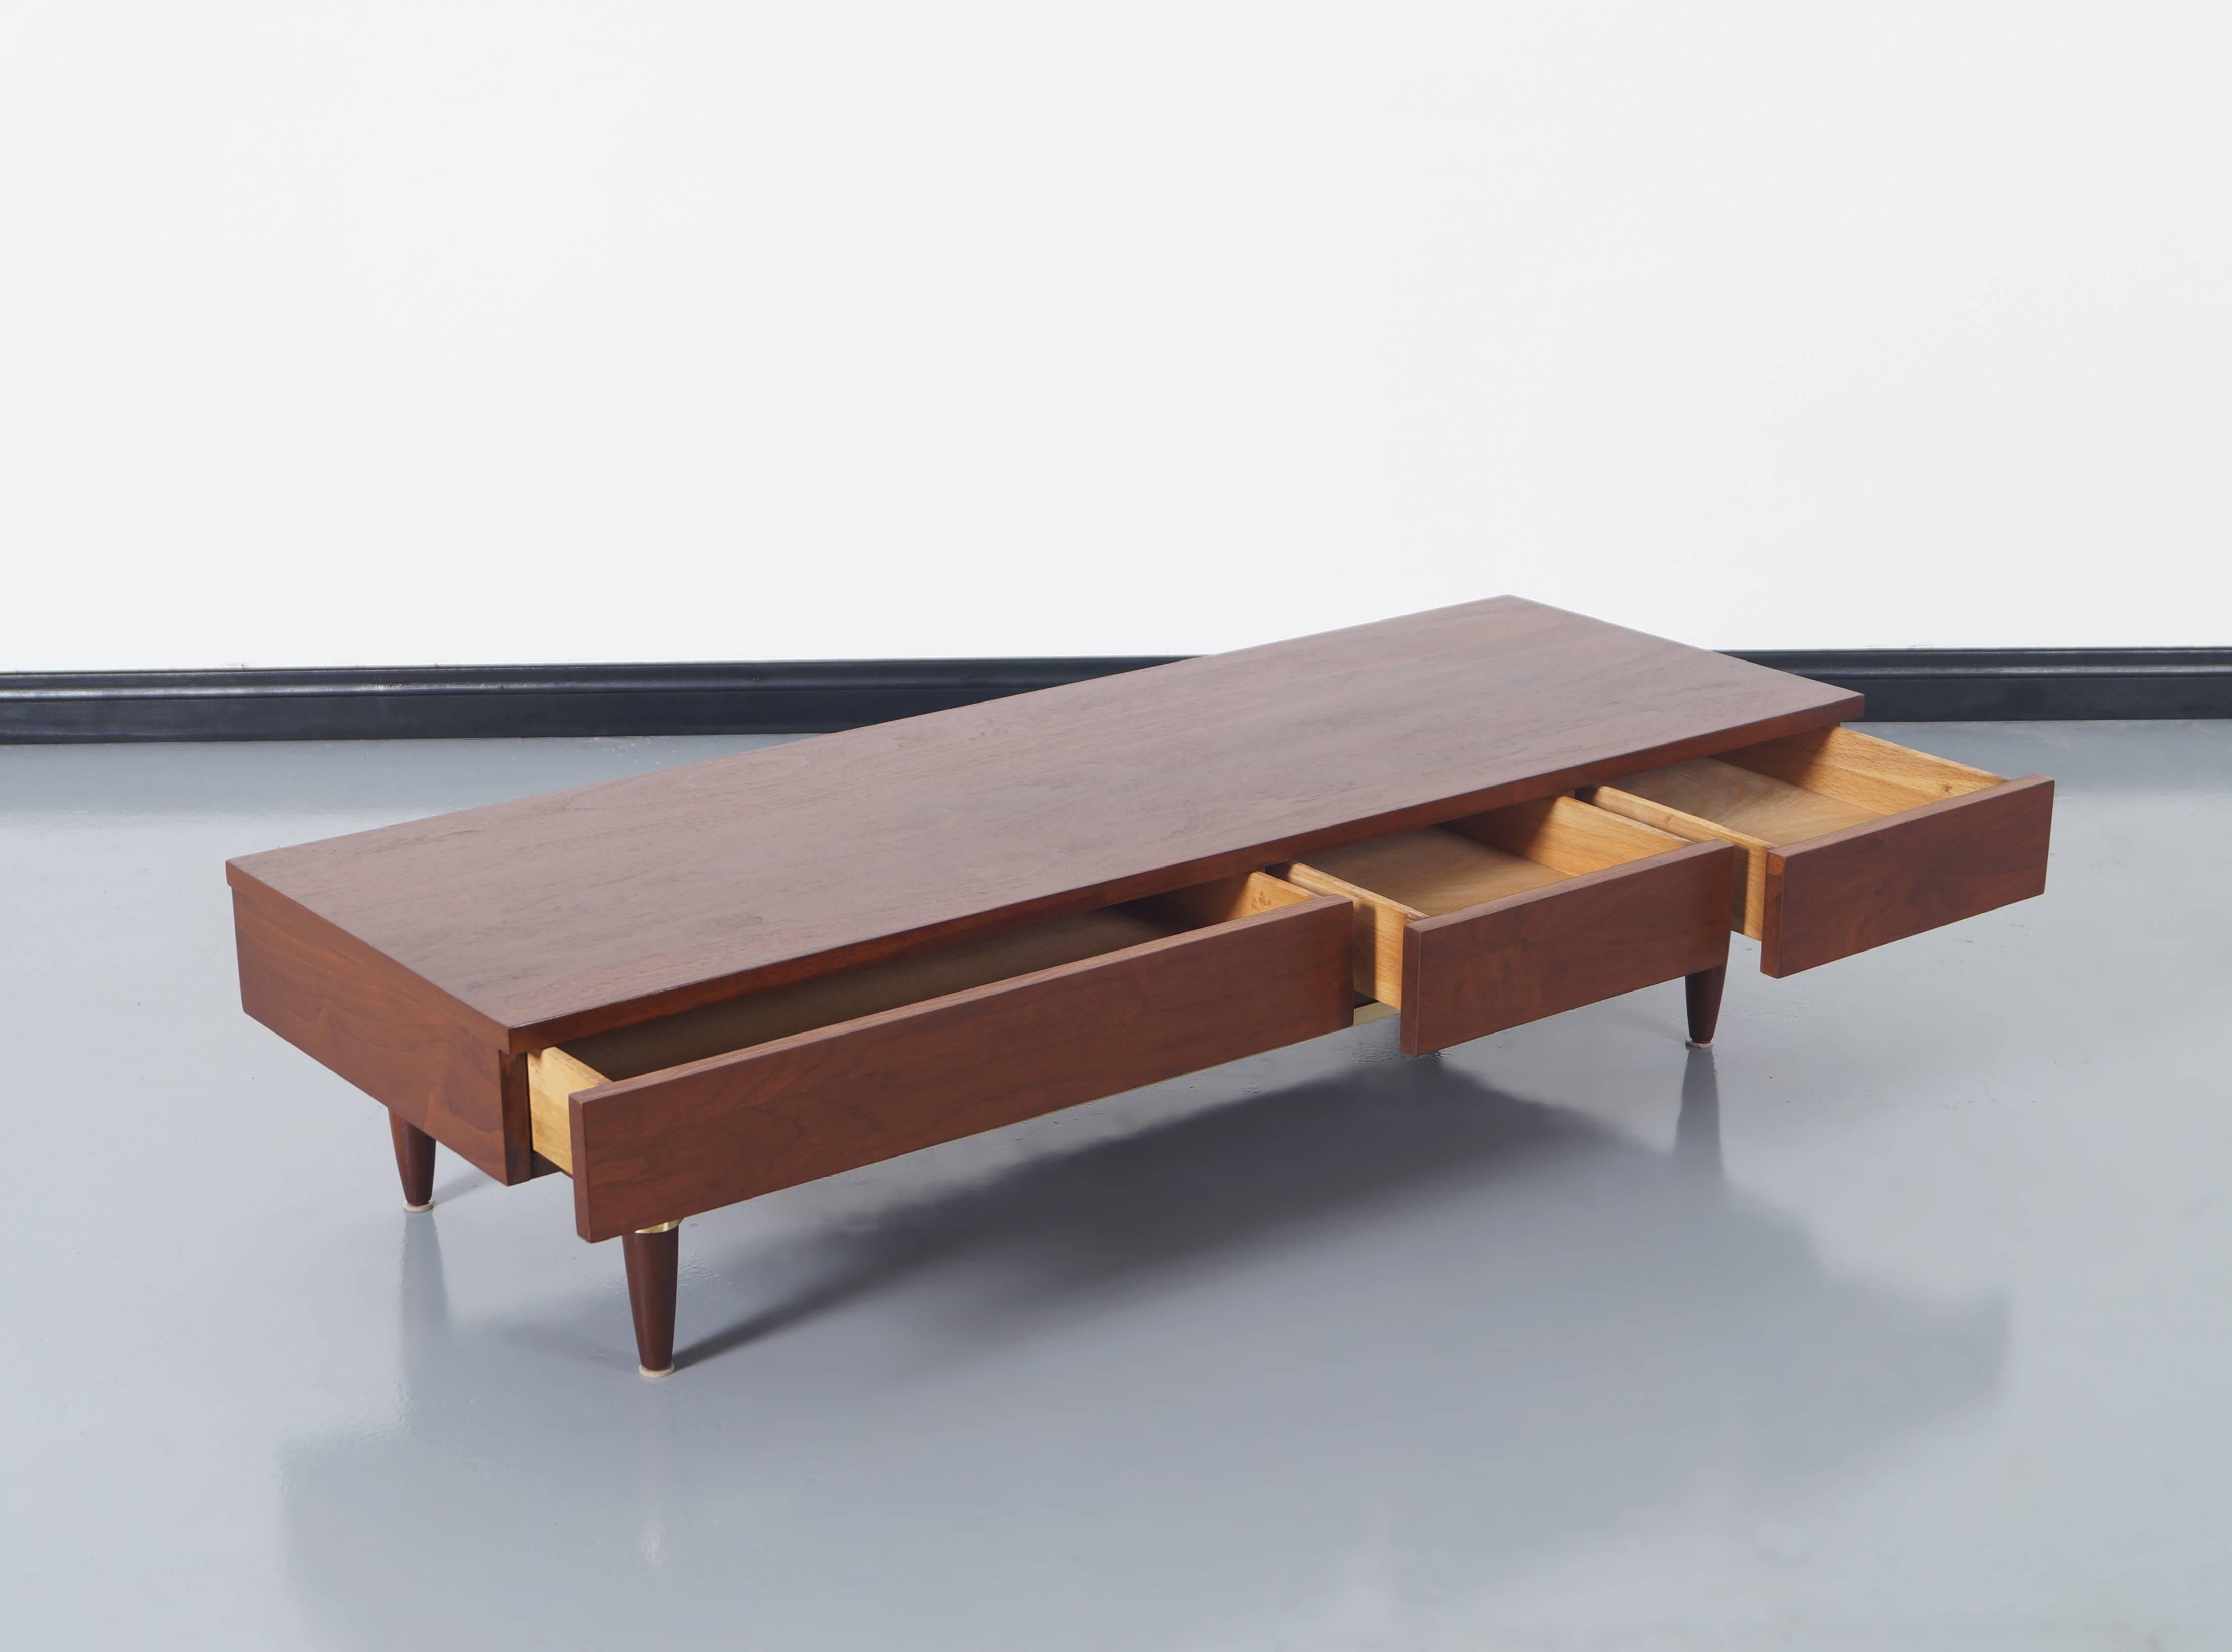 Vintage walnut and brass bench designed by Merton Gershun for American of Martinsville. Features three dovetail drawers and solid brass trim around the base. Newly refinished.